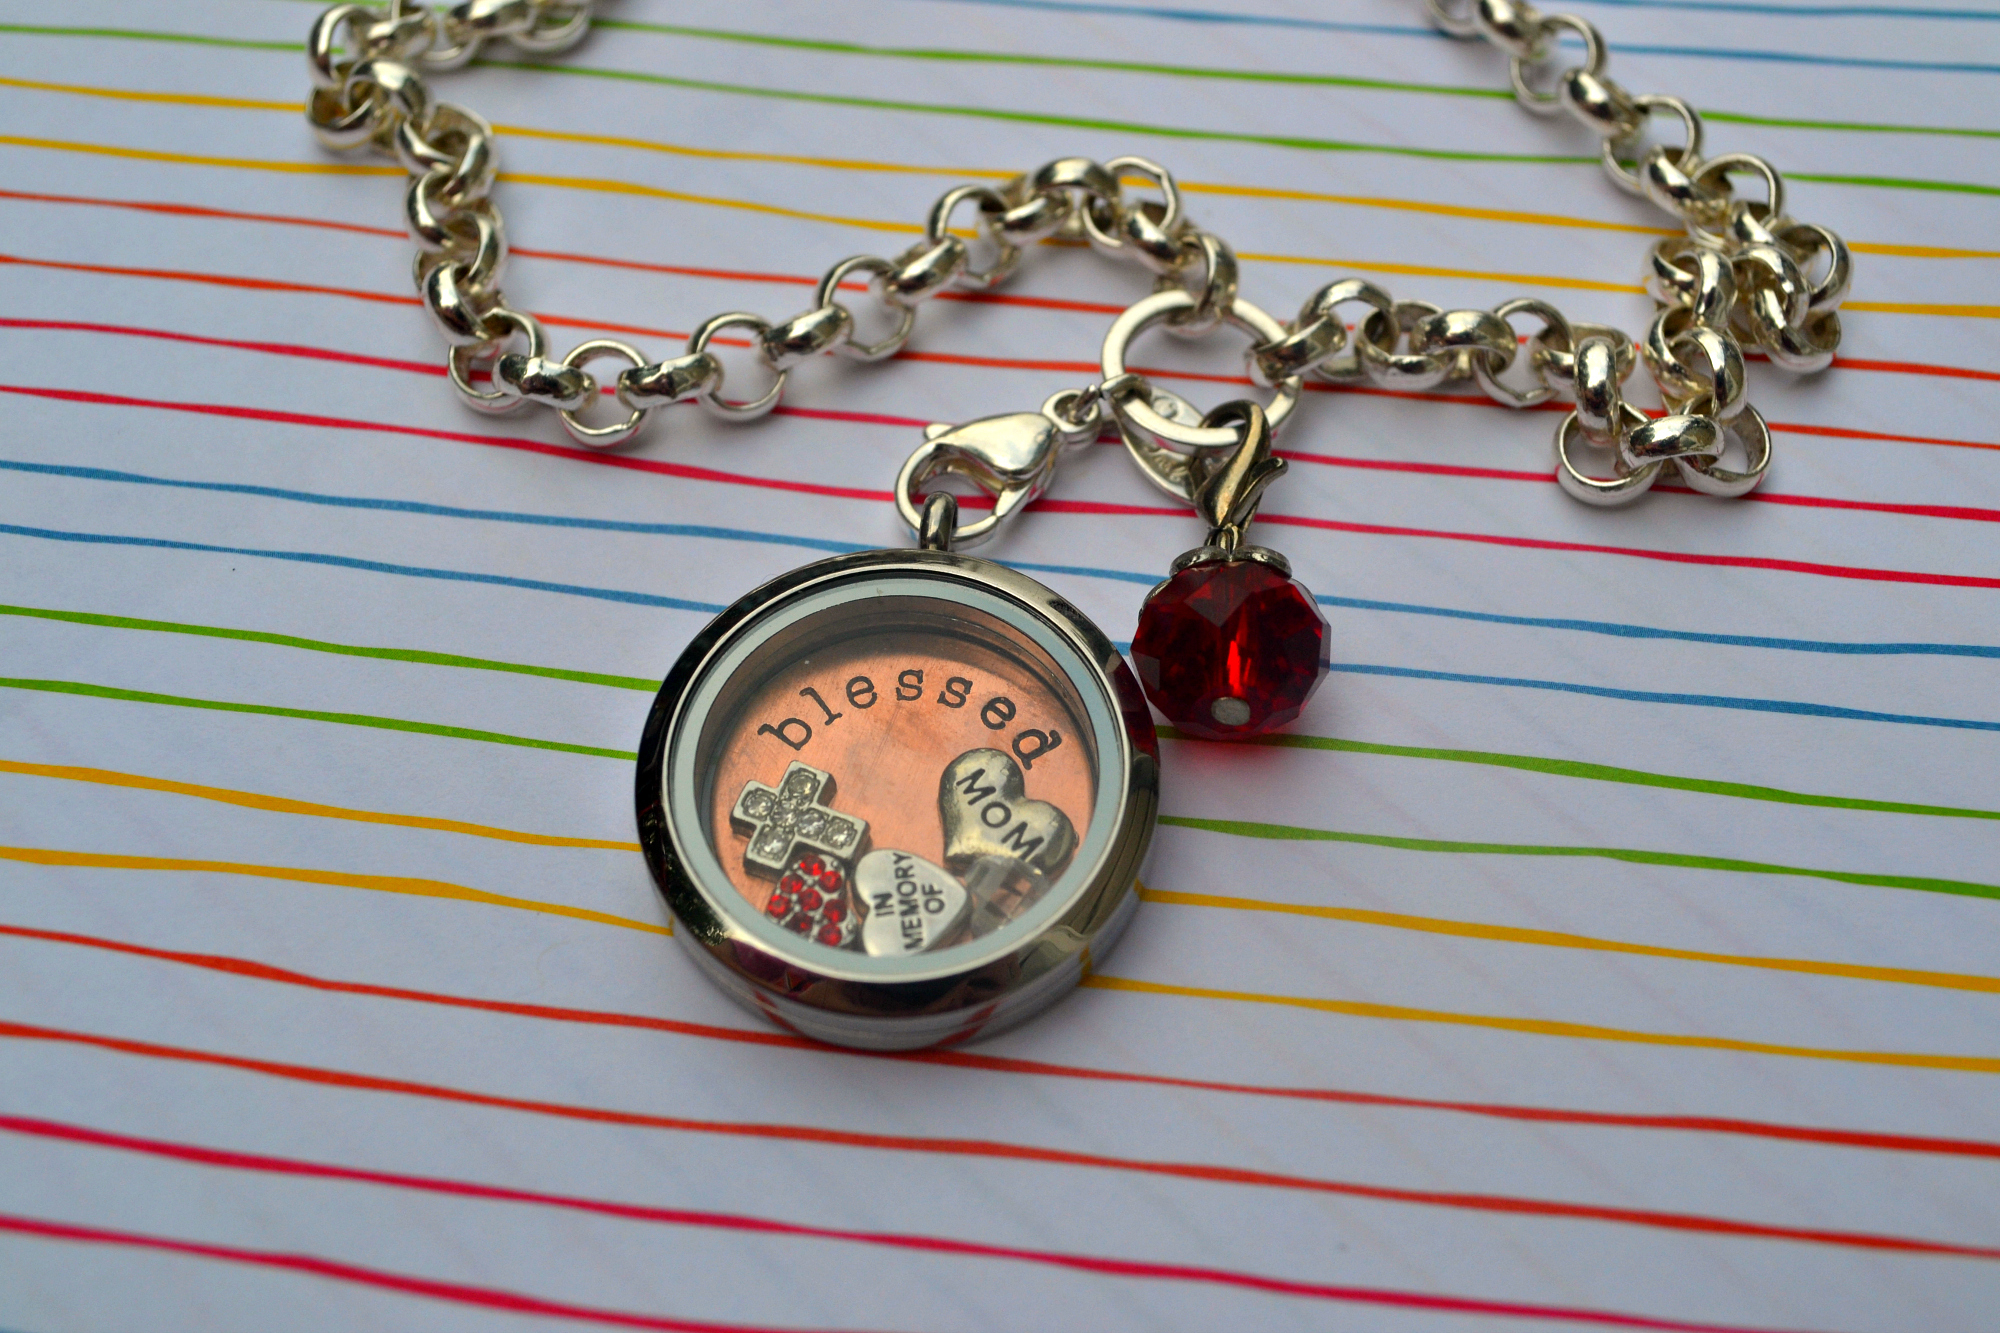 Origami Owl Cross Charm Origami Owl Necklace In Honor Of My Mom Plus A Giveaway